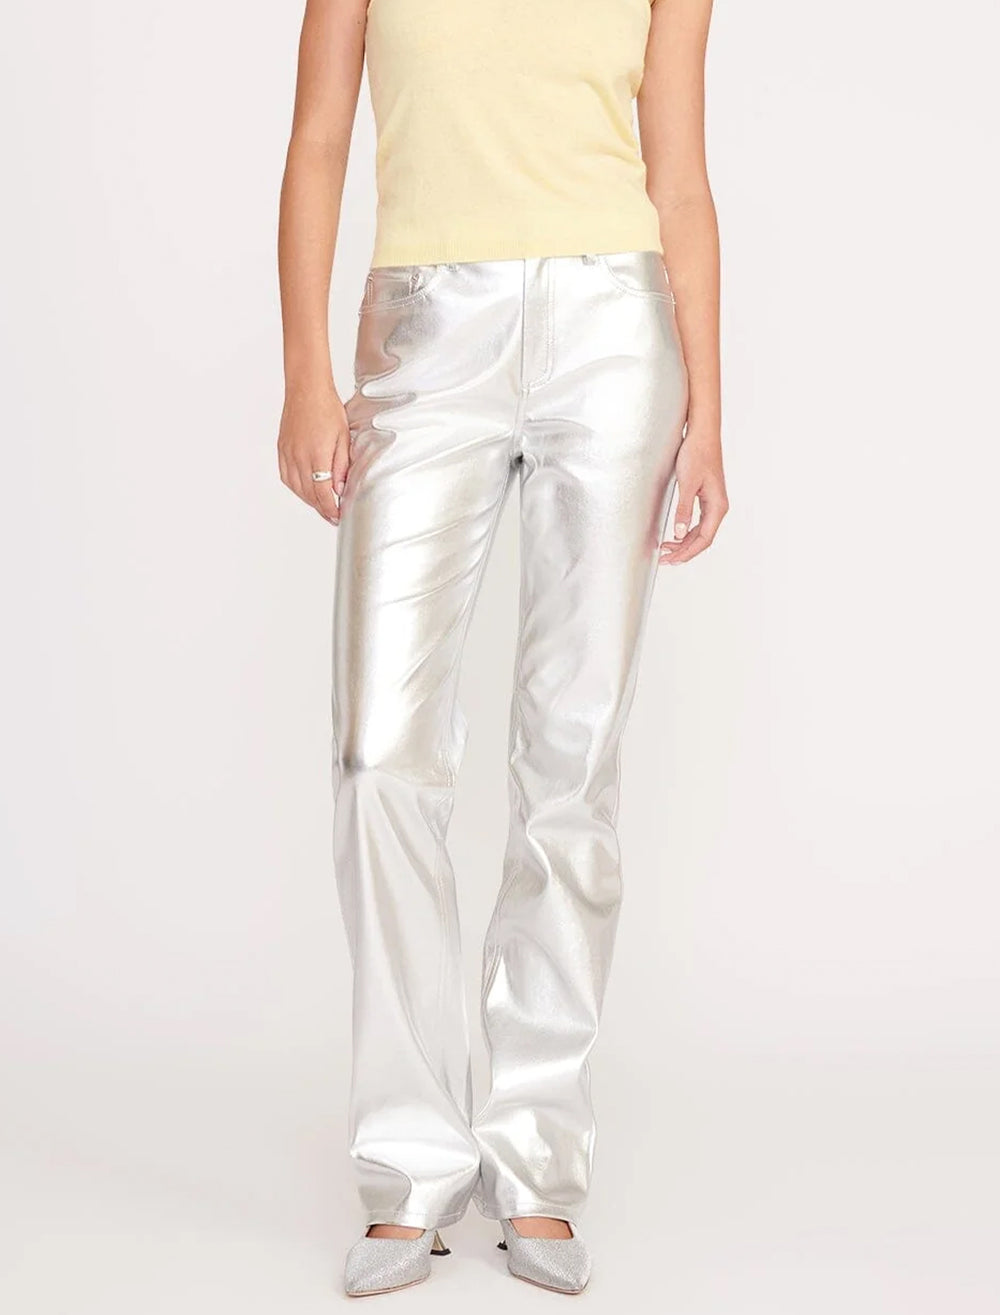 Model wearing STAUD's chisel pant in silver.